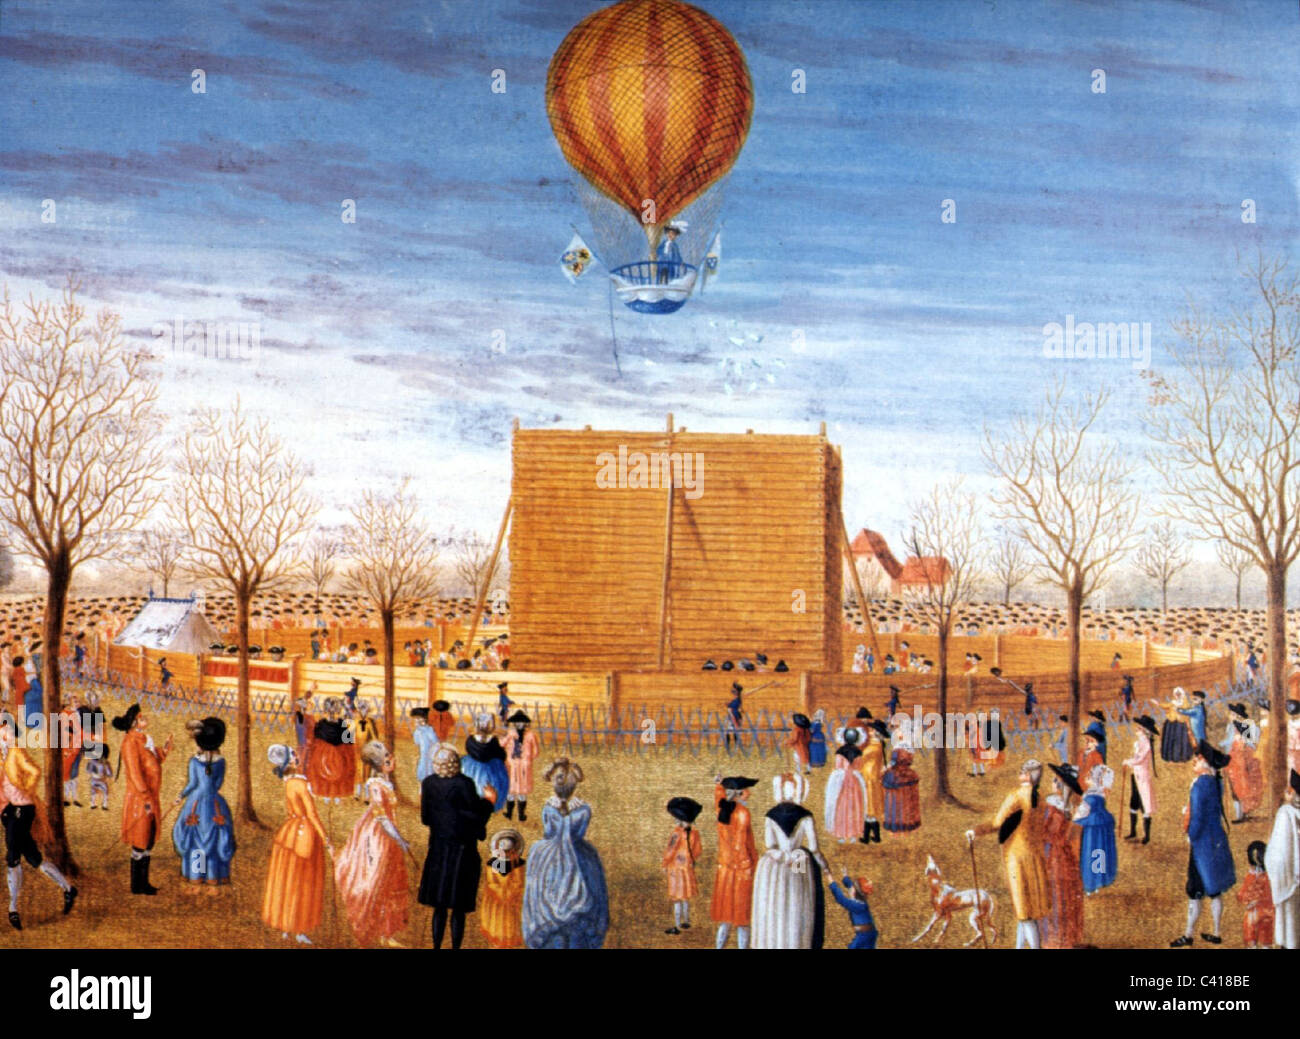 transport / transportation, aviation, balloon, Jean-Pierre Blanchard, his balloon flight, Nuremberg, Germany, 1787, Additional-Rights-Clearences-Not Available Stock Photo